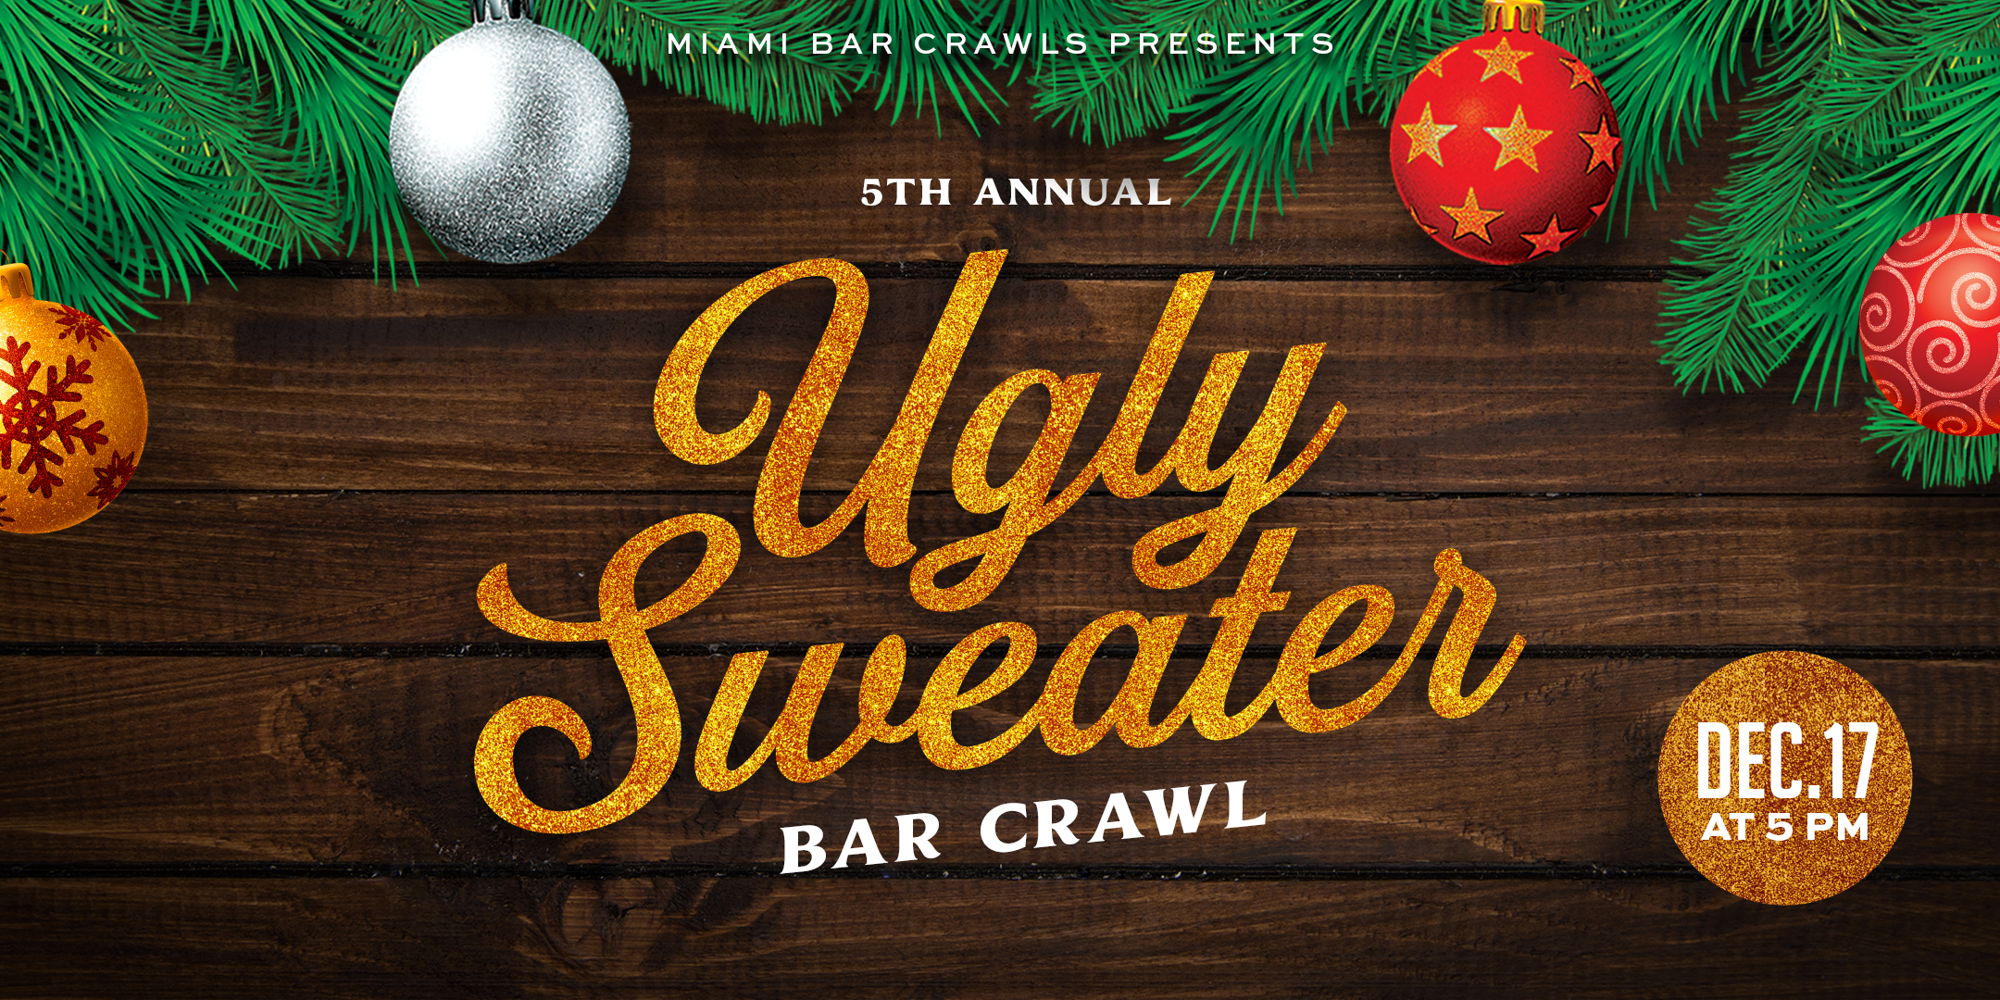 Miami Bar Crawls wants you to join us for our 5th Annual Ugly Sweater Bar Crawl! promotional image